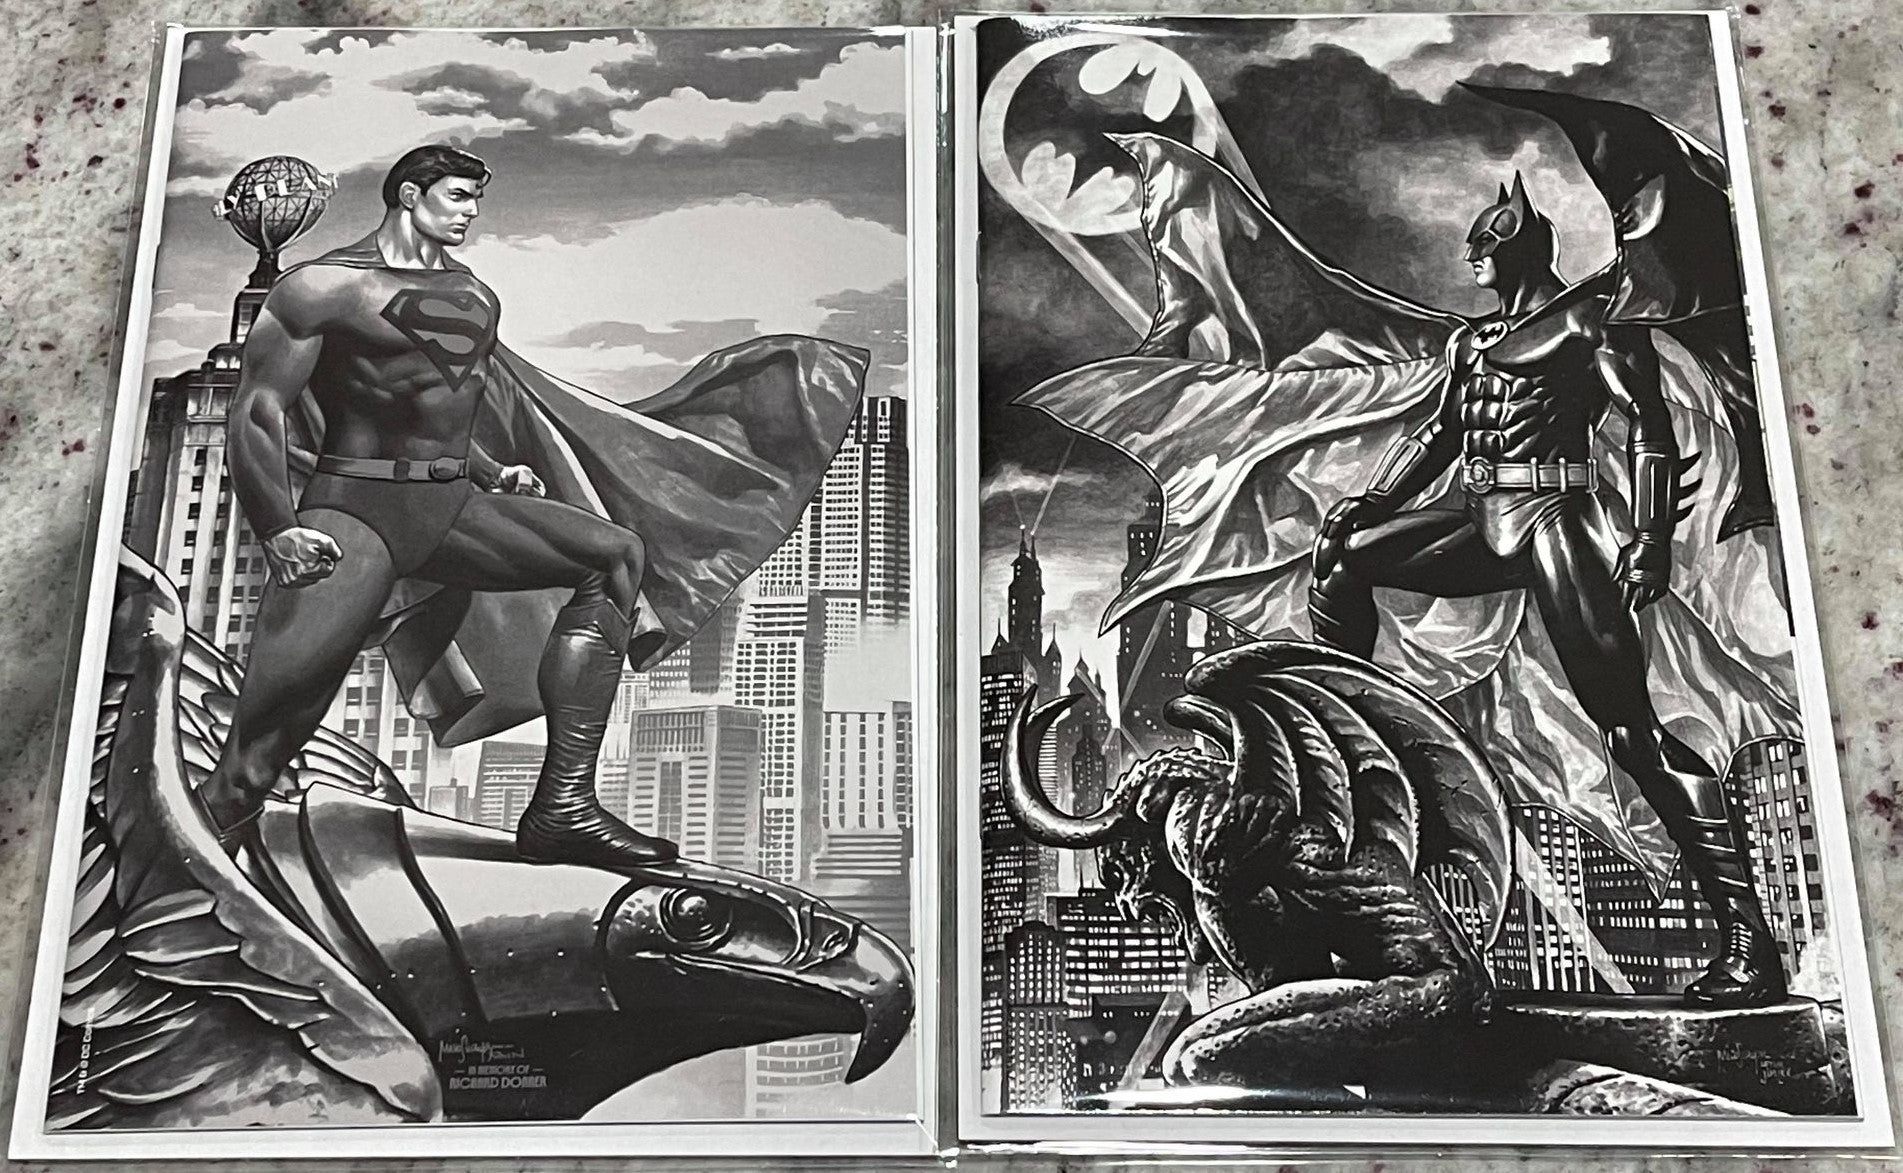 BATMAN 89 #1 & SUPERMAN 78 #1 MICO SUAYAN CONVENTION EXCLUSIVE VARIANT SET (D3) WITH COLLECTOR' BOX